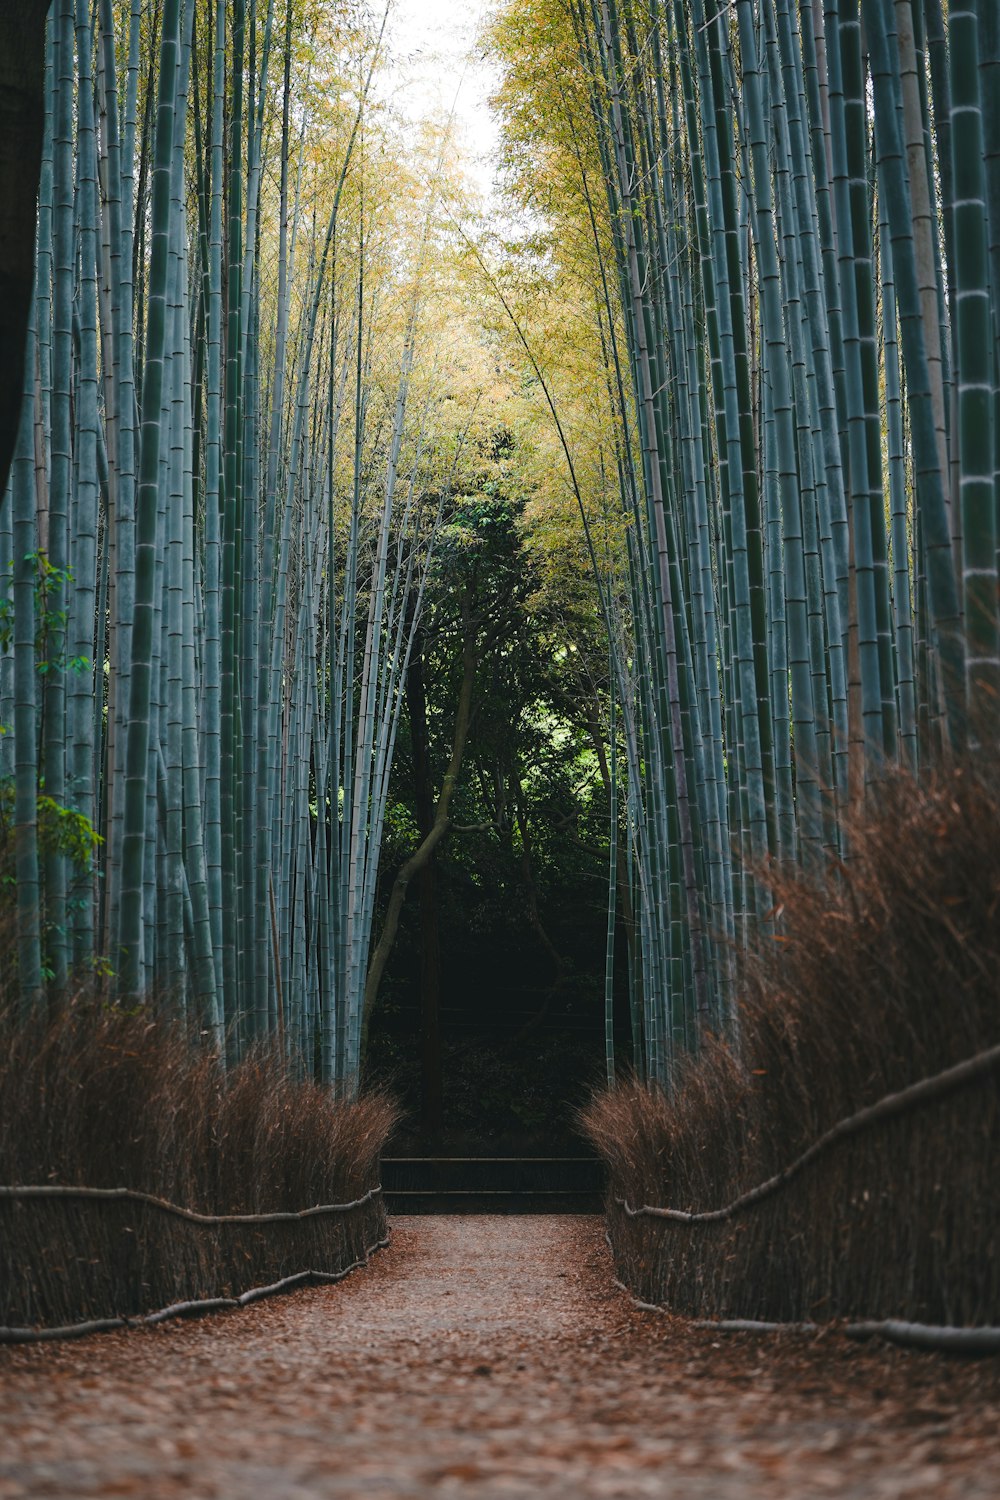 a path through a bamboo forest with tall trees